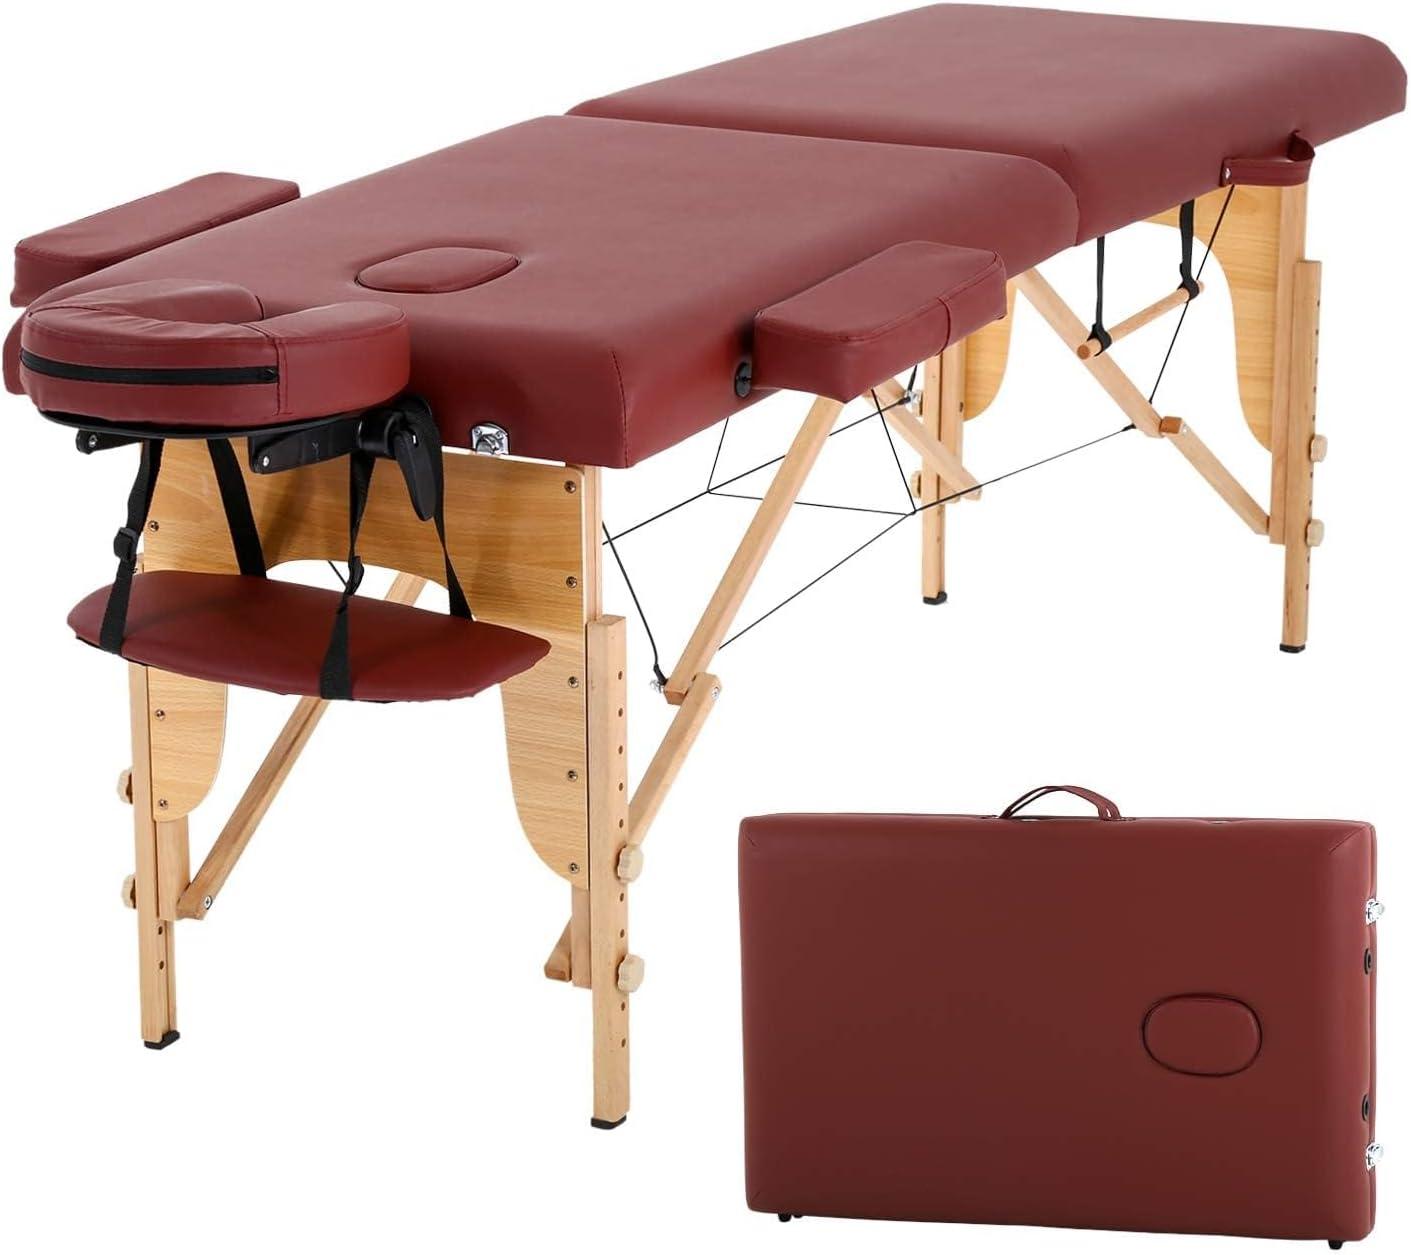 COOLBABY KYBJ-304 Portable Fitness Massage Table - Professional Adjustable Folding Bed for Ultimate Relaxation - COOLBABY